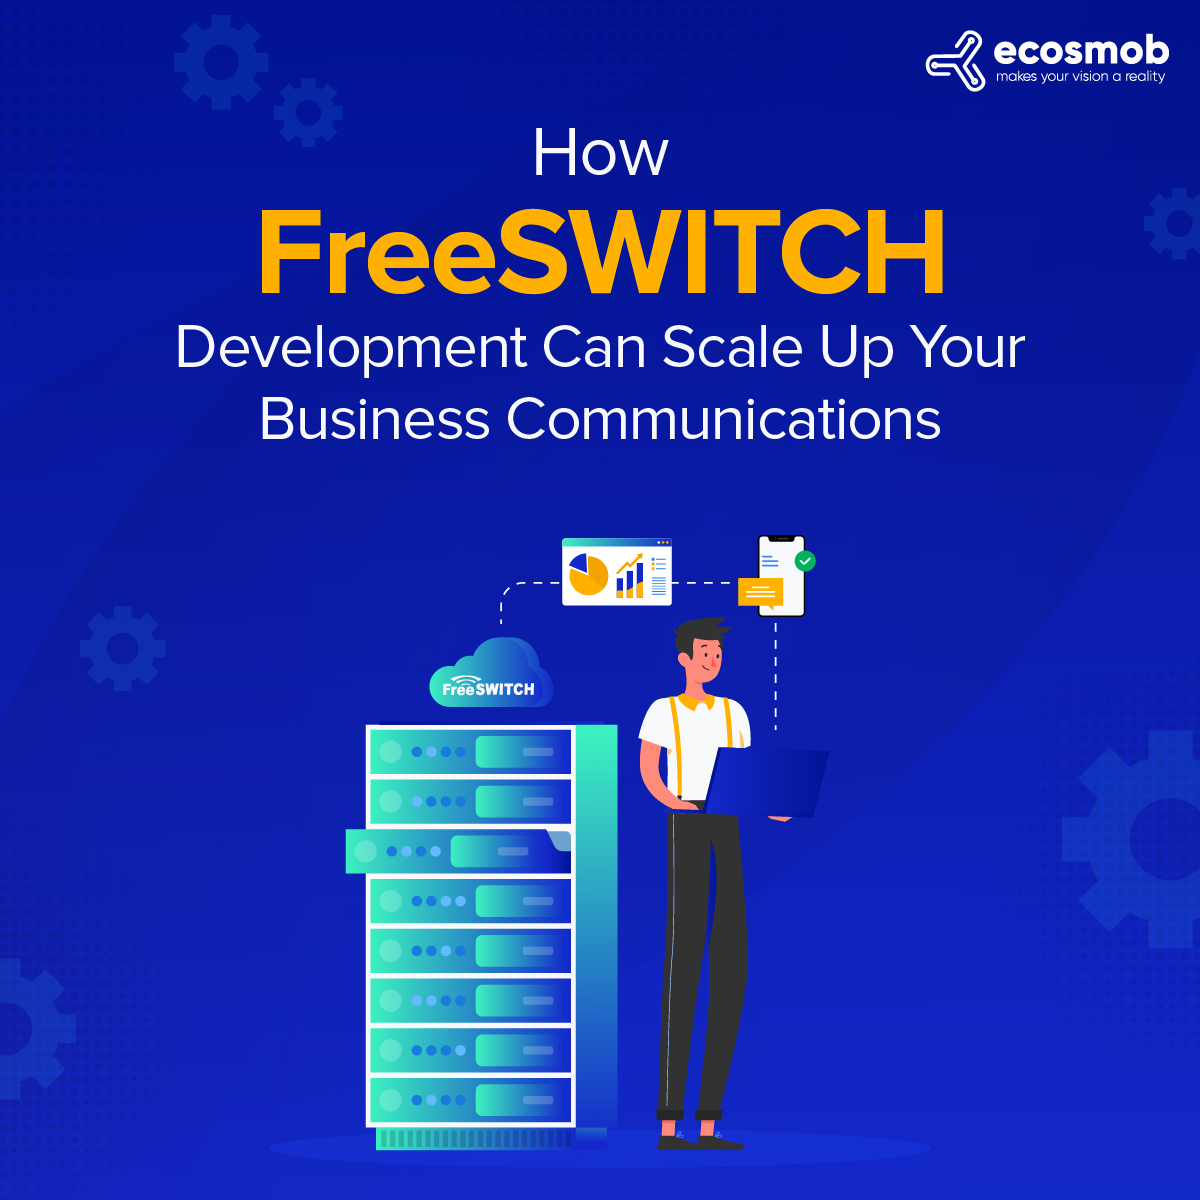 How FreeSWITCH Development Can Scale Up Your Business Communications